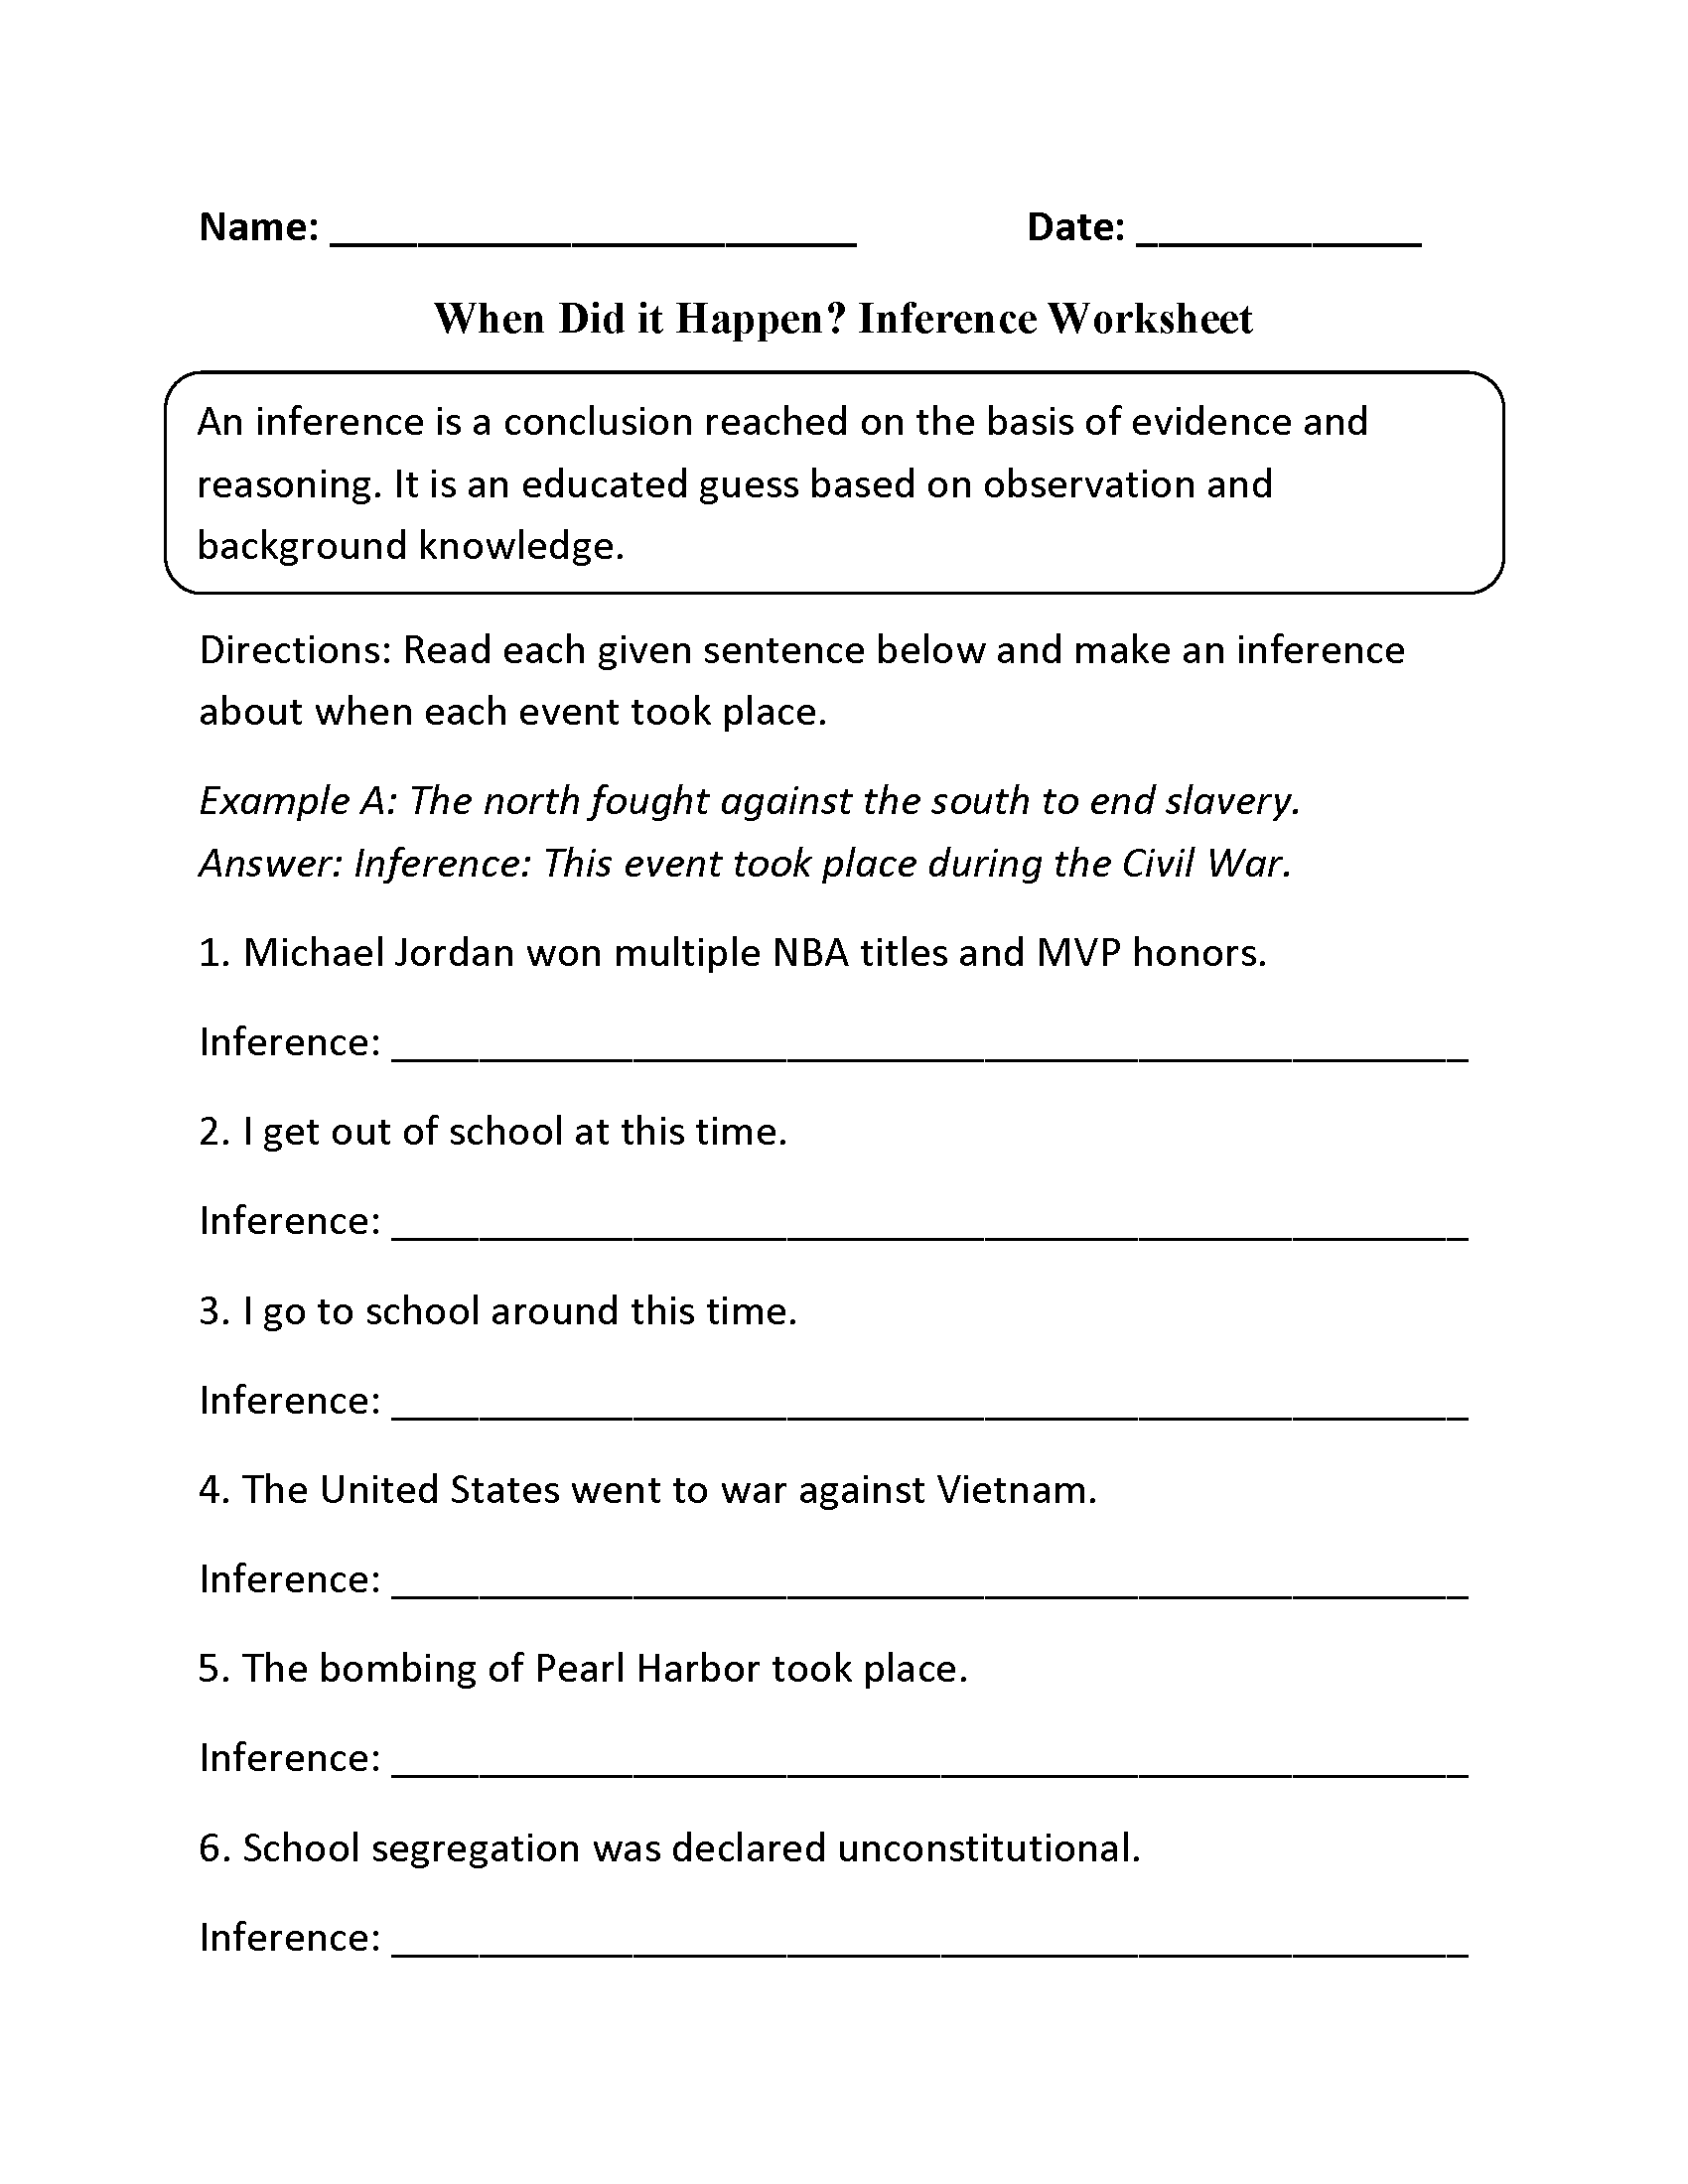 When Did it Happen? Inference Worksheets